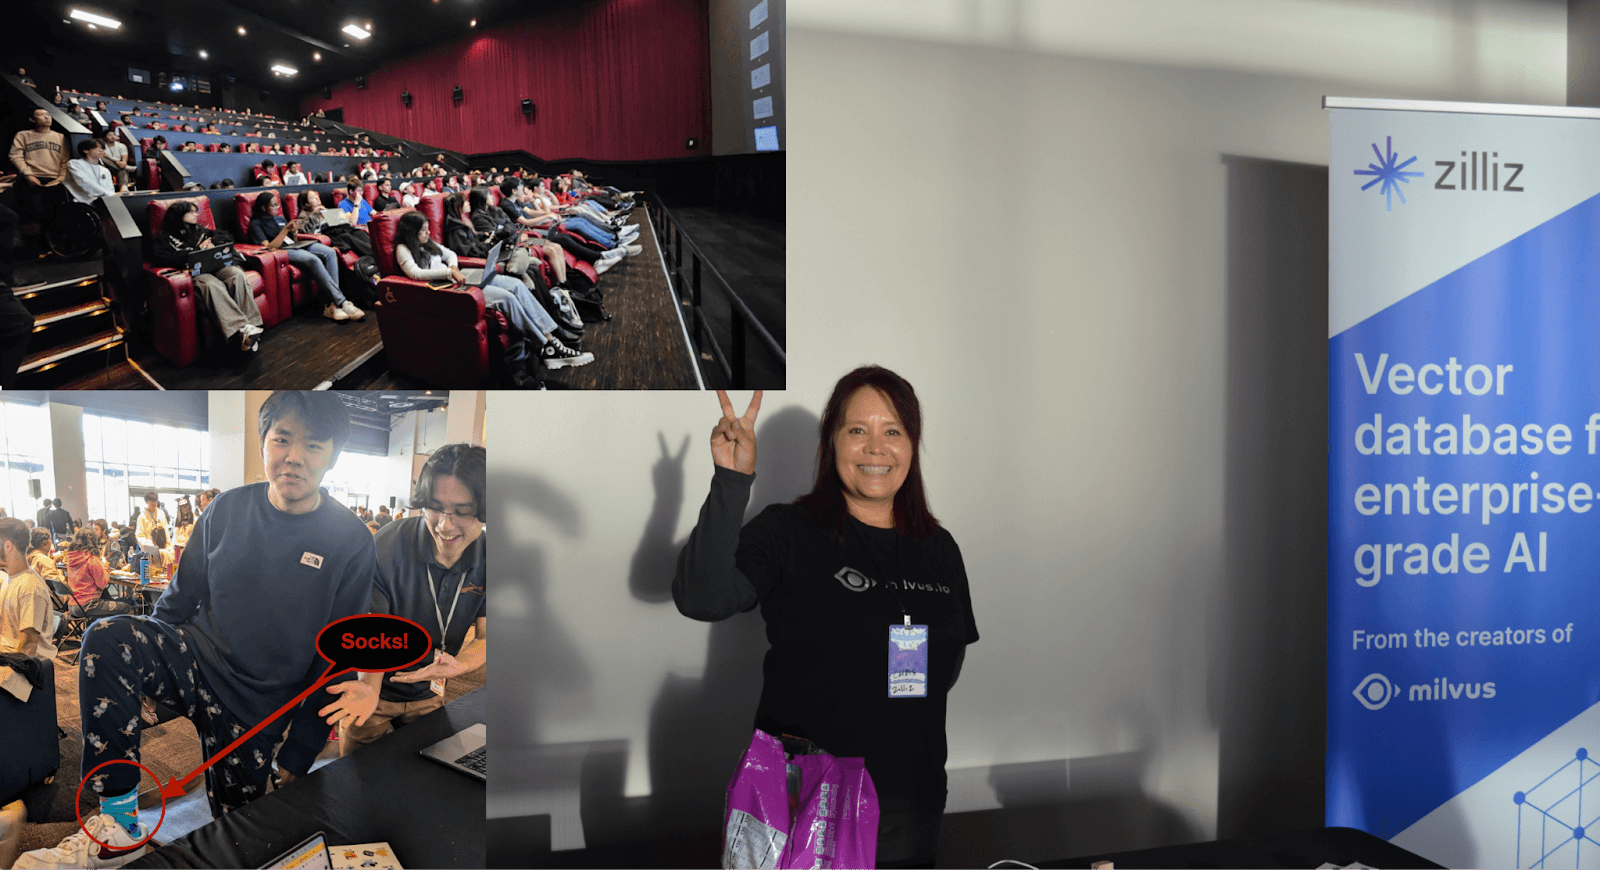 Top left: workshop in a movie theater. Right: Chris Churilo at the Zilliz sponsor table. Bottom left: Zilliz swag socks, image by author. All other image sources: CalHacks 2023.